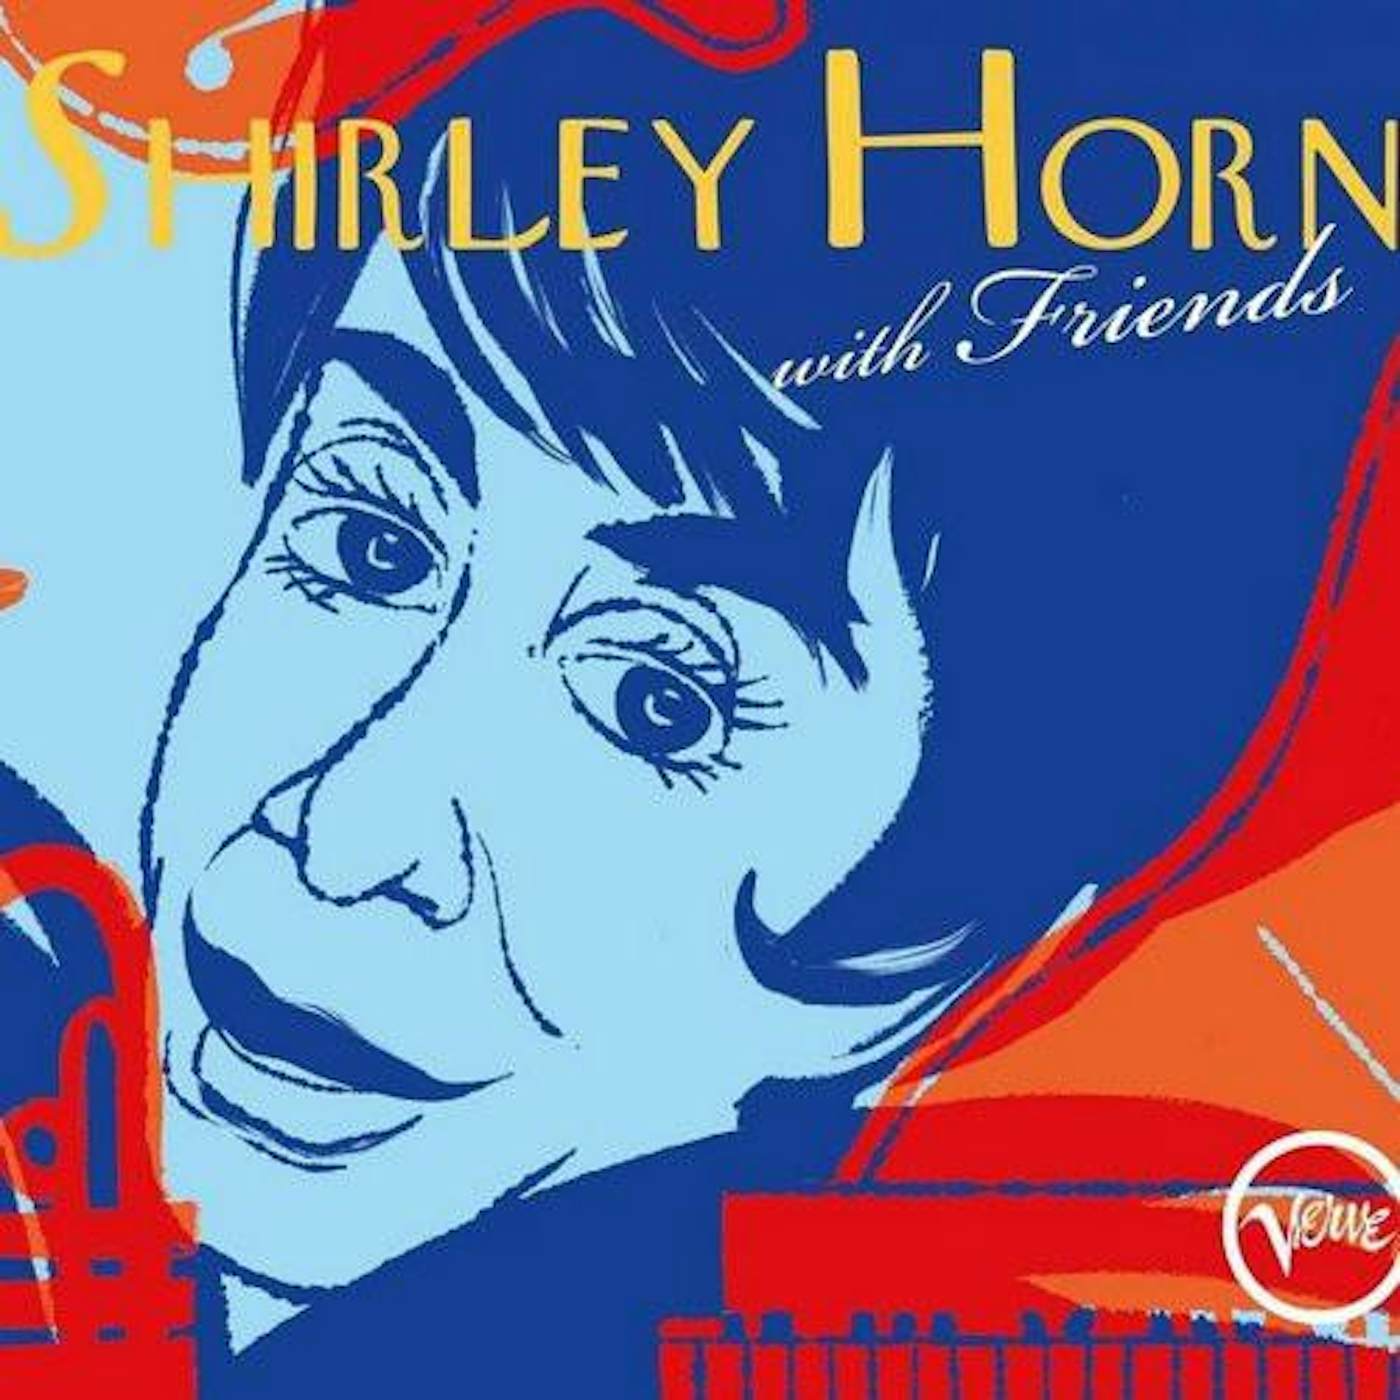 SHIRLEY HORN WITH FRIENDS (2 CD) CD